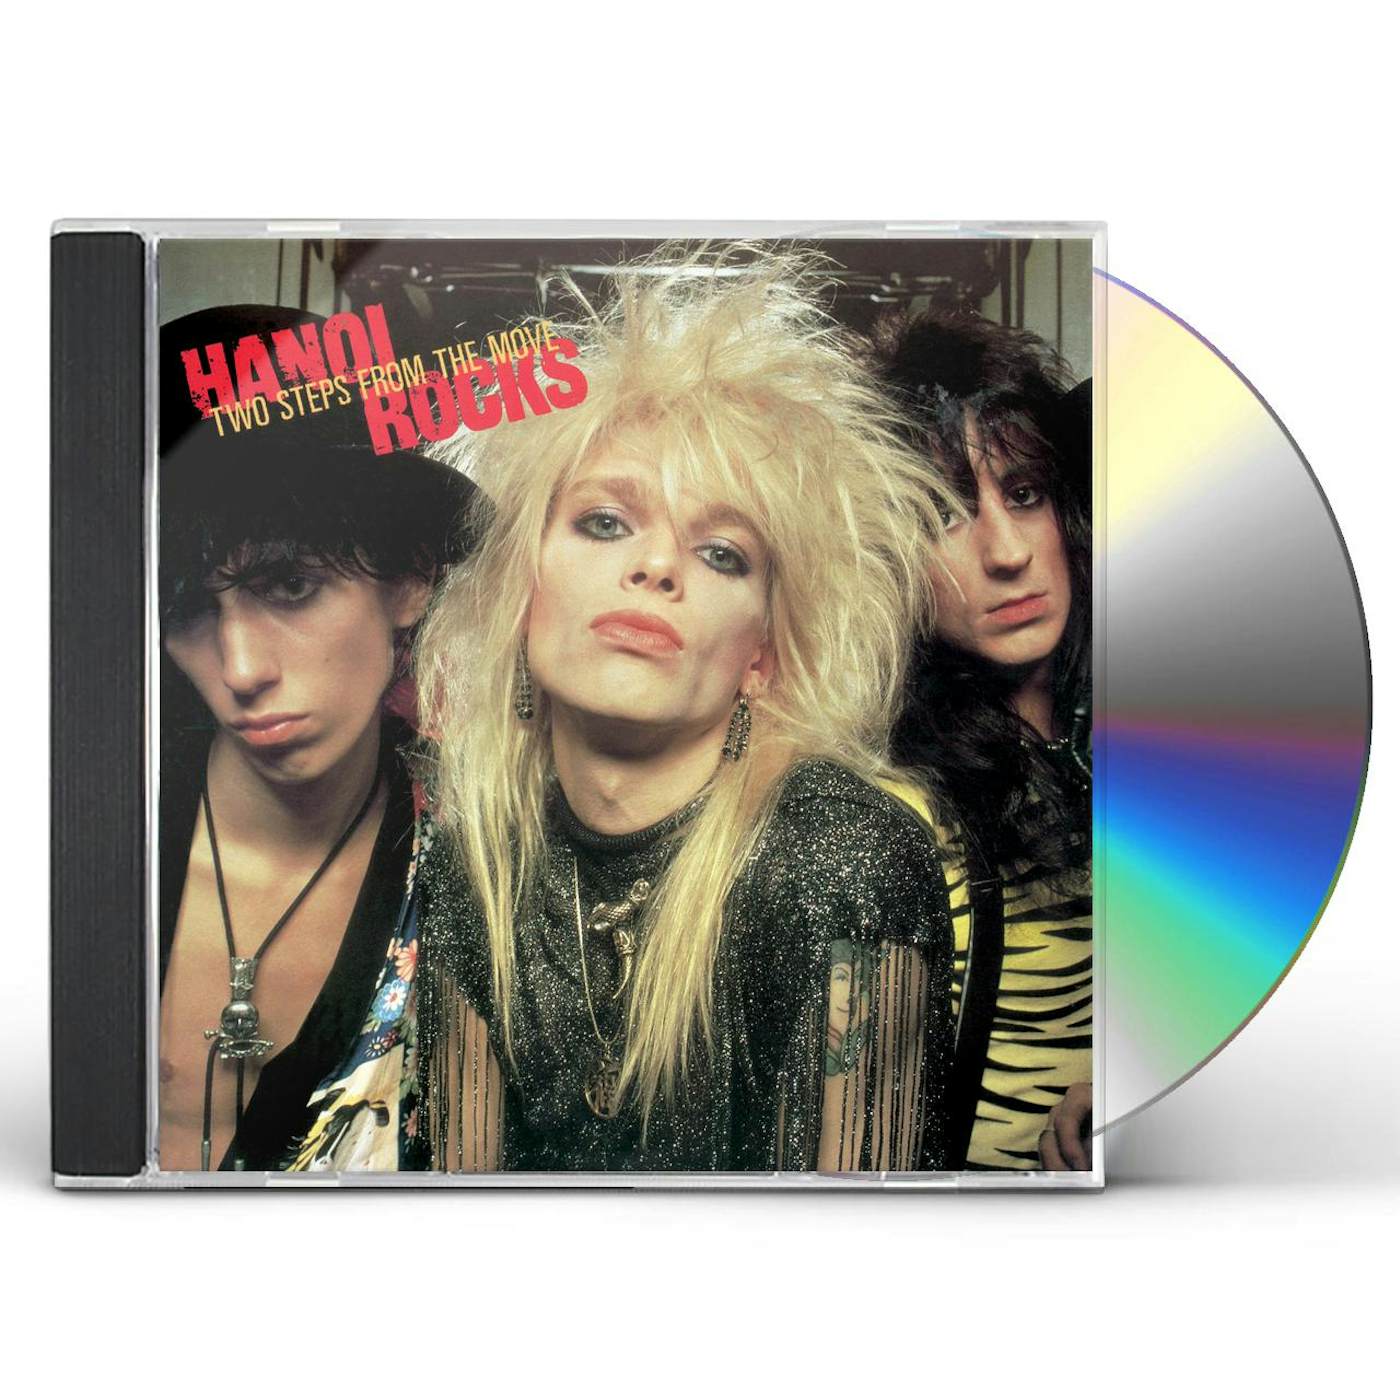 Hanoi Rocks TWO STEPS FROM THE MOVE CD